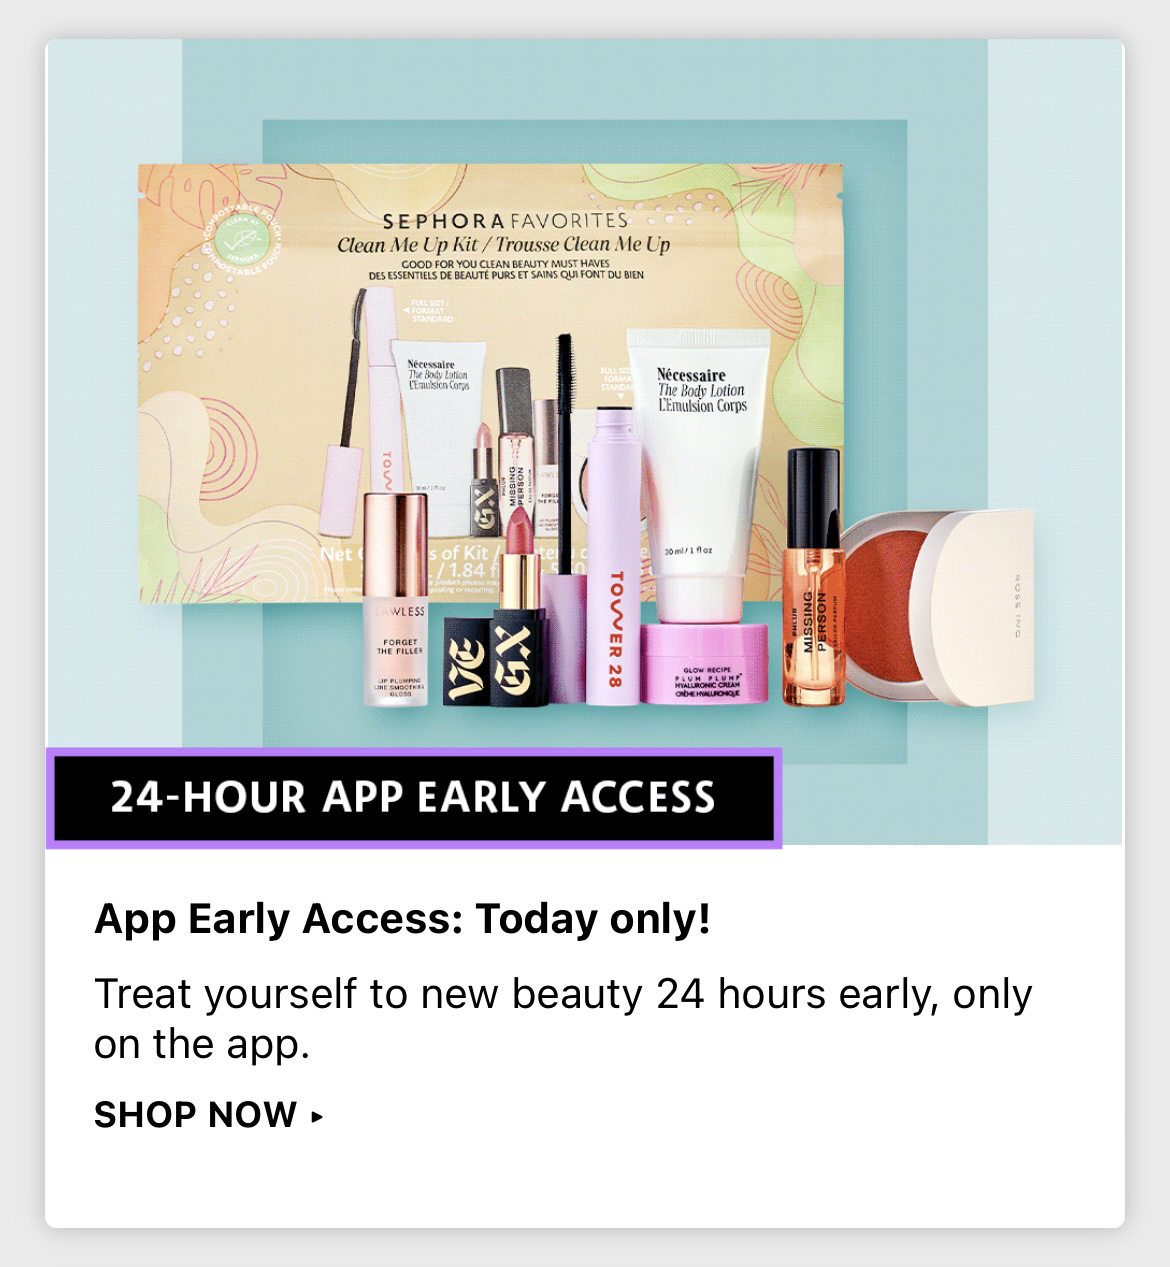 "24-hour app early access" offer from Sephora